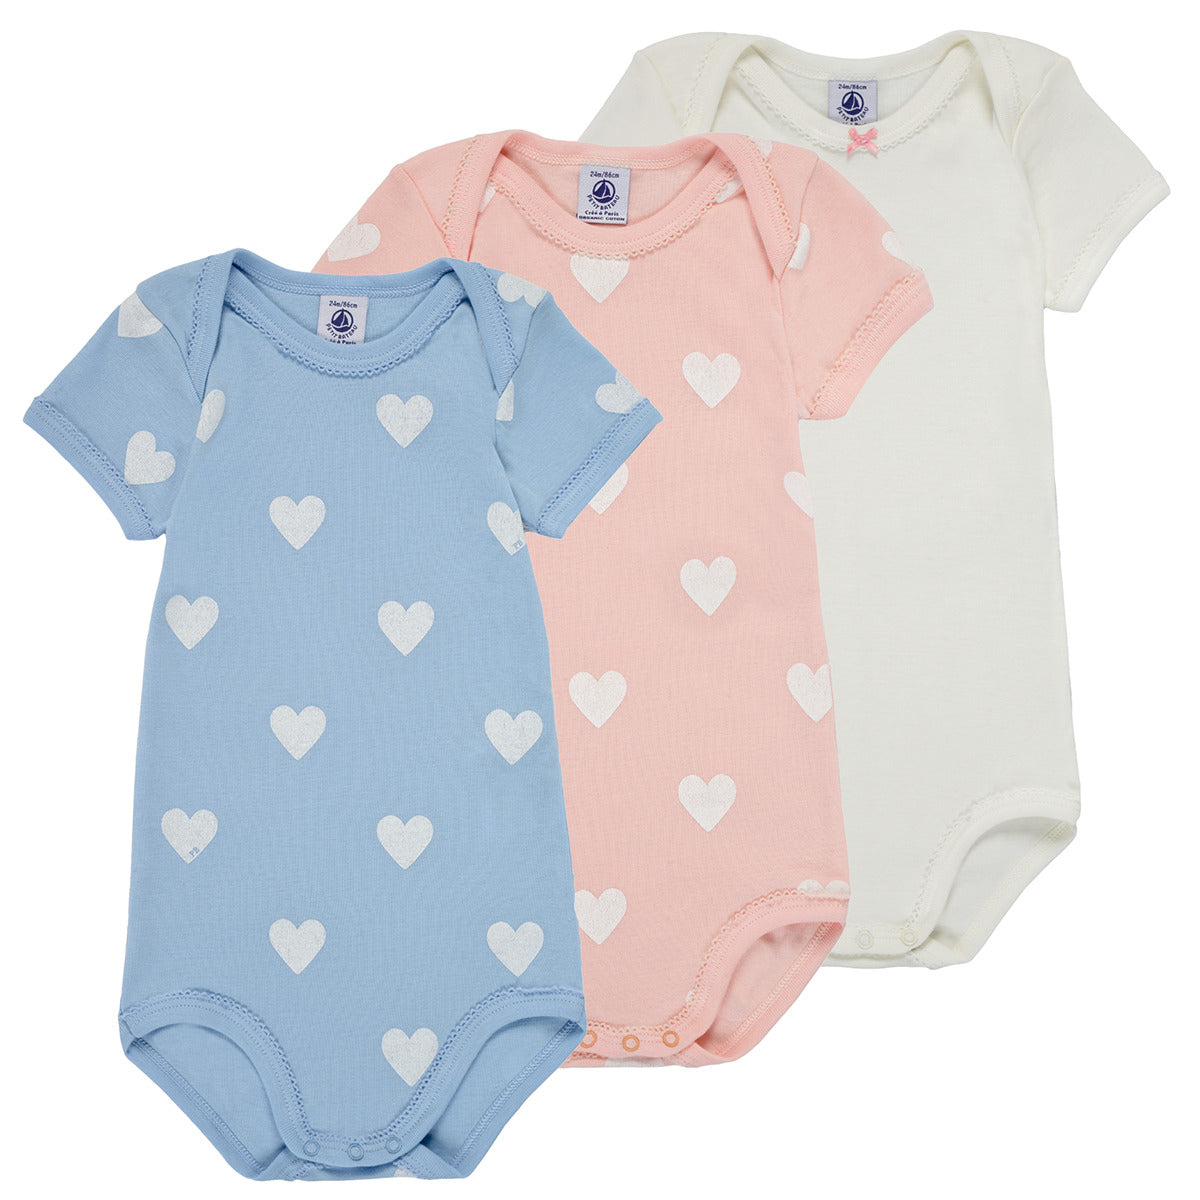 Petit Bateau 3 Piece Bodies with Hearts at Bonjour Baby Baskets - Best Corporate Baby Gifts 